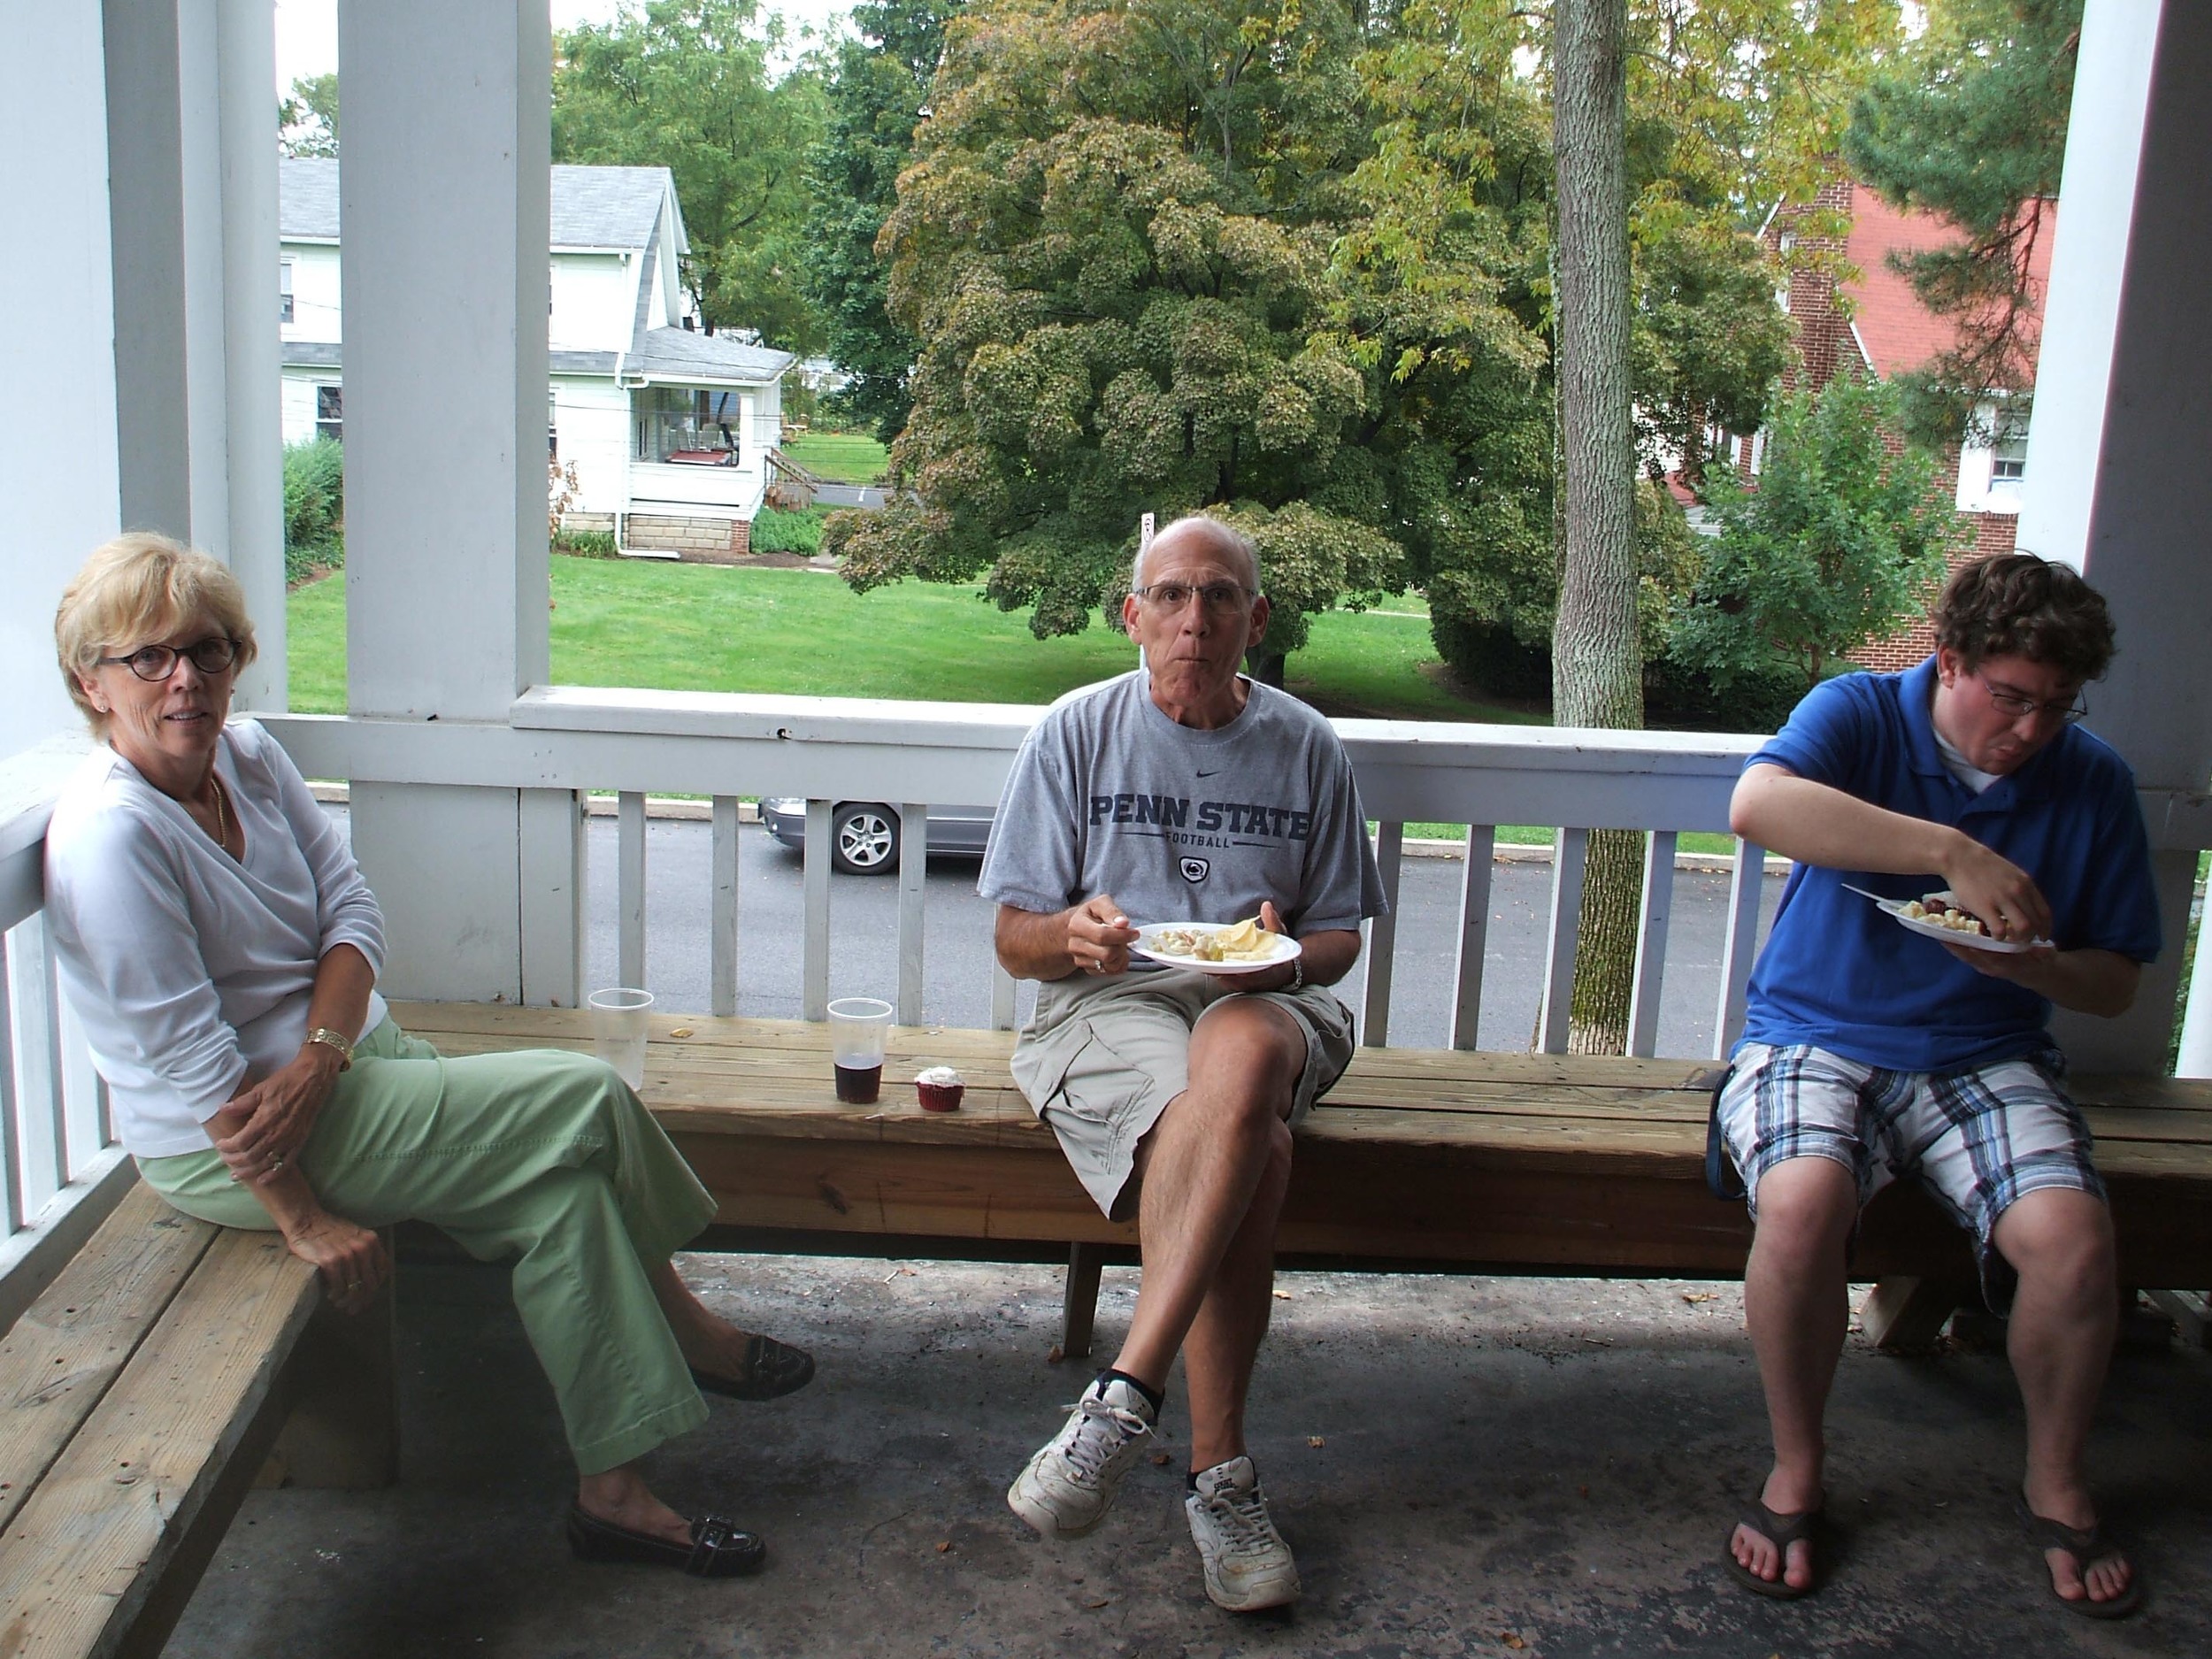  L to R: Jean and Richard Bartnik and Jullien Hohman
Labor Day Picnic - September 3, 2012 